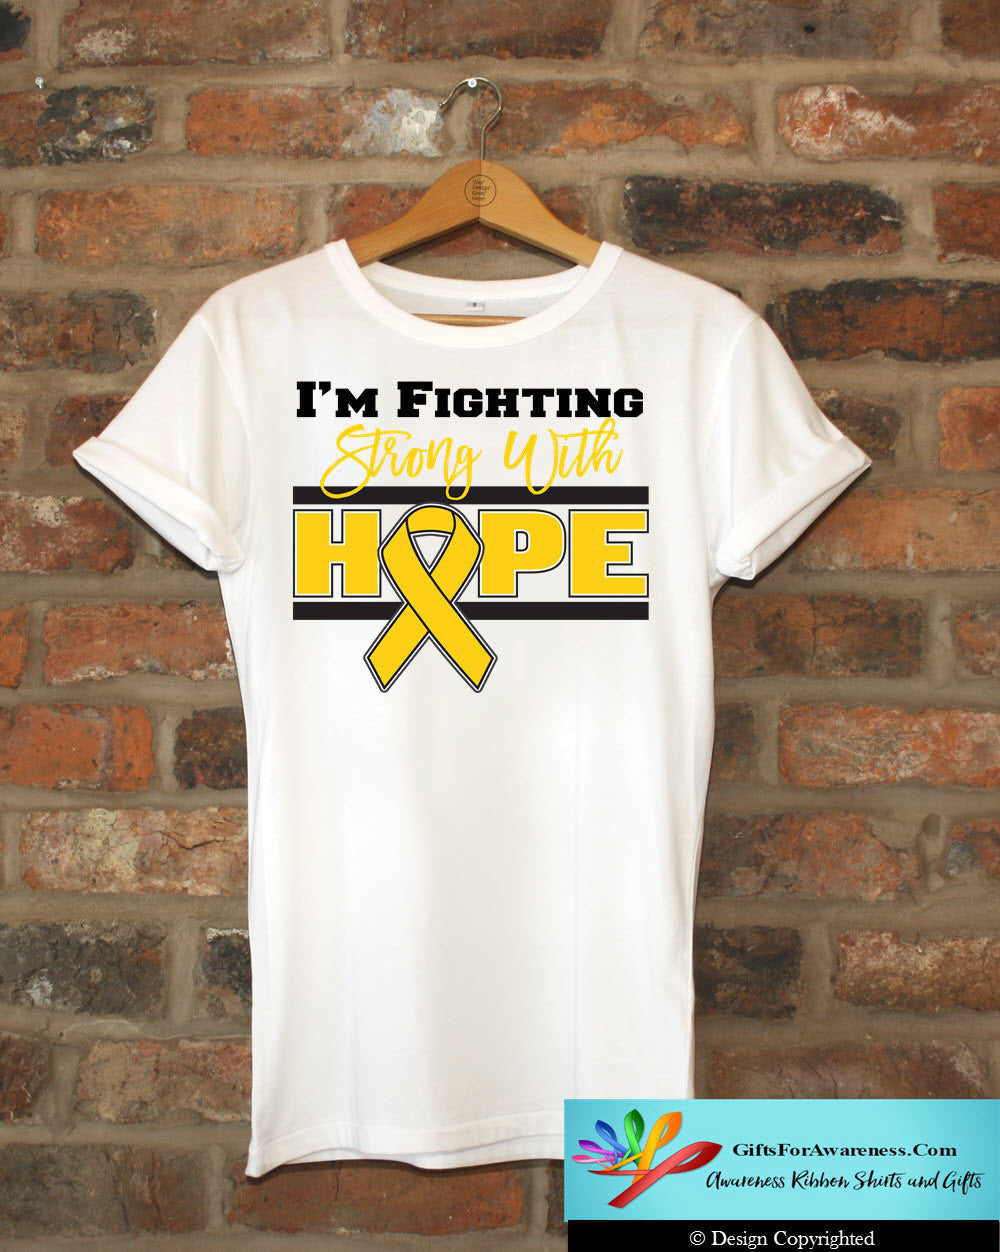 Childhood Cancer Fighting Strong With Hope Shirts - GiftsForAwareness